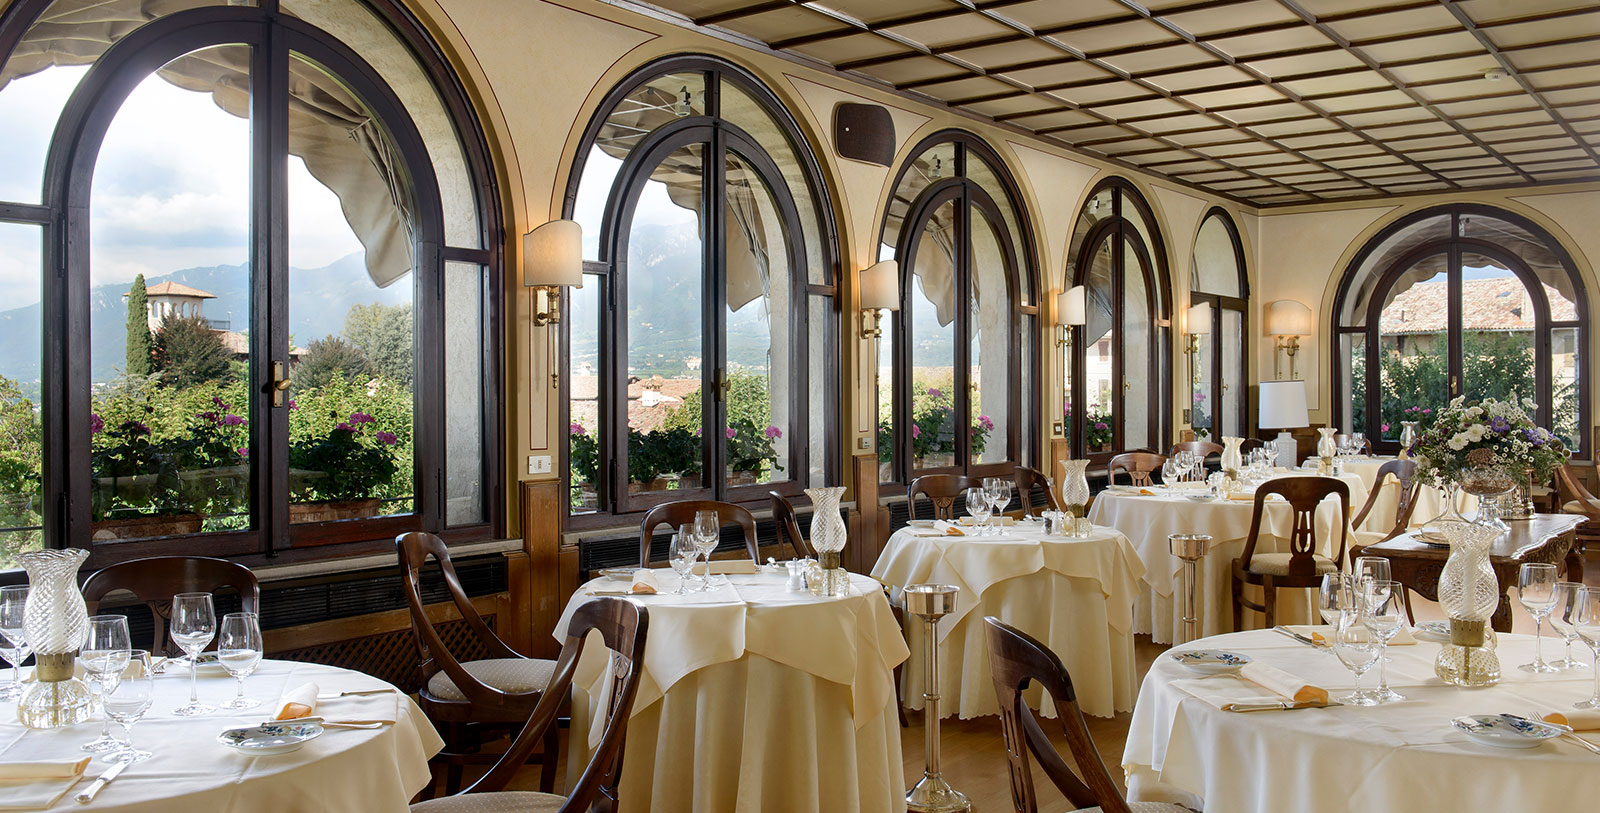 Image of Villa Cipriani Restaurant at Hotel Villa Cipriani Exterior, Hotel Villa Cipriani, 1550, a member of Historic Hotels Worldwide, Asolo, Italy